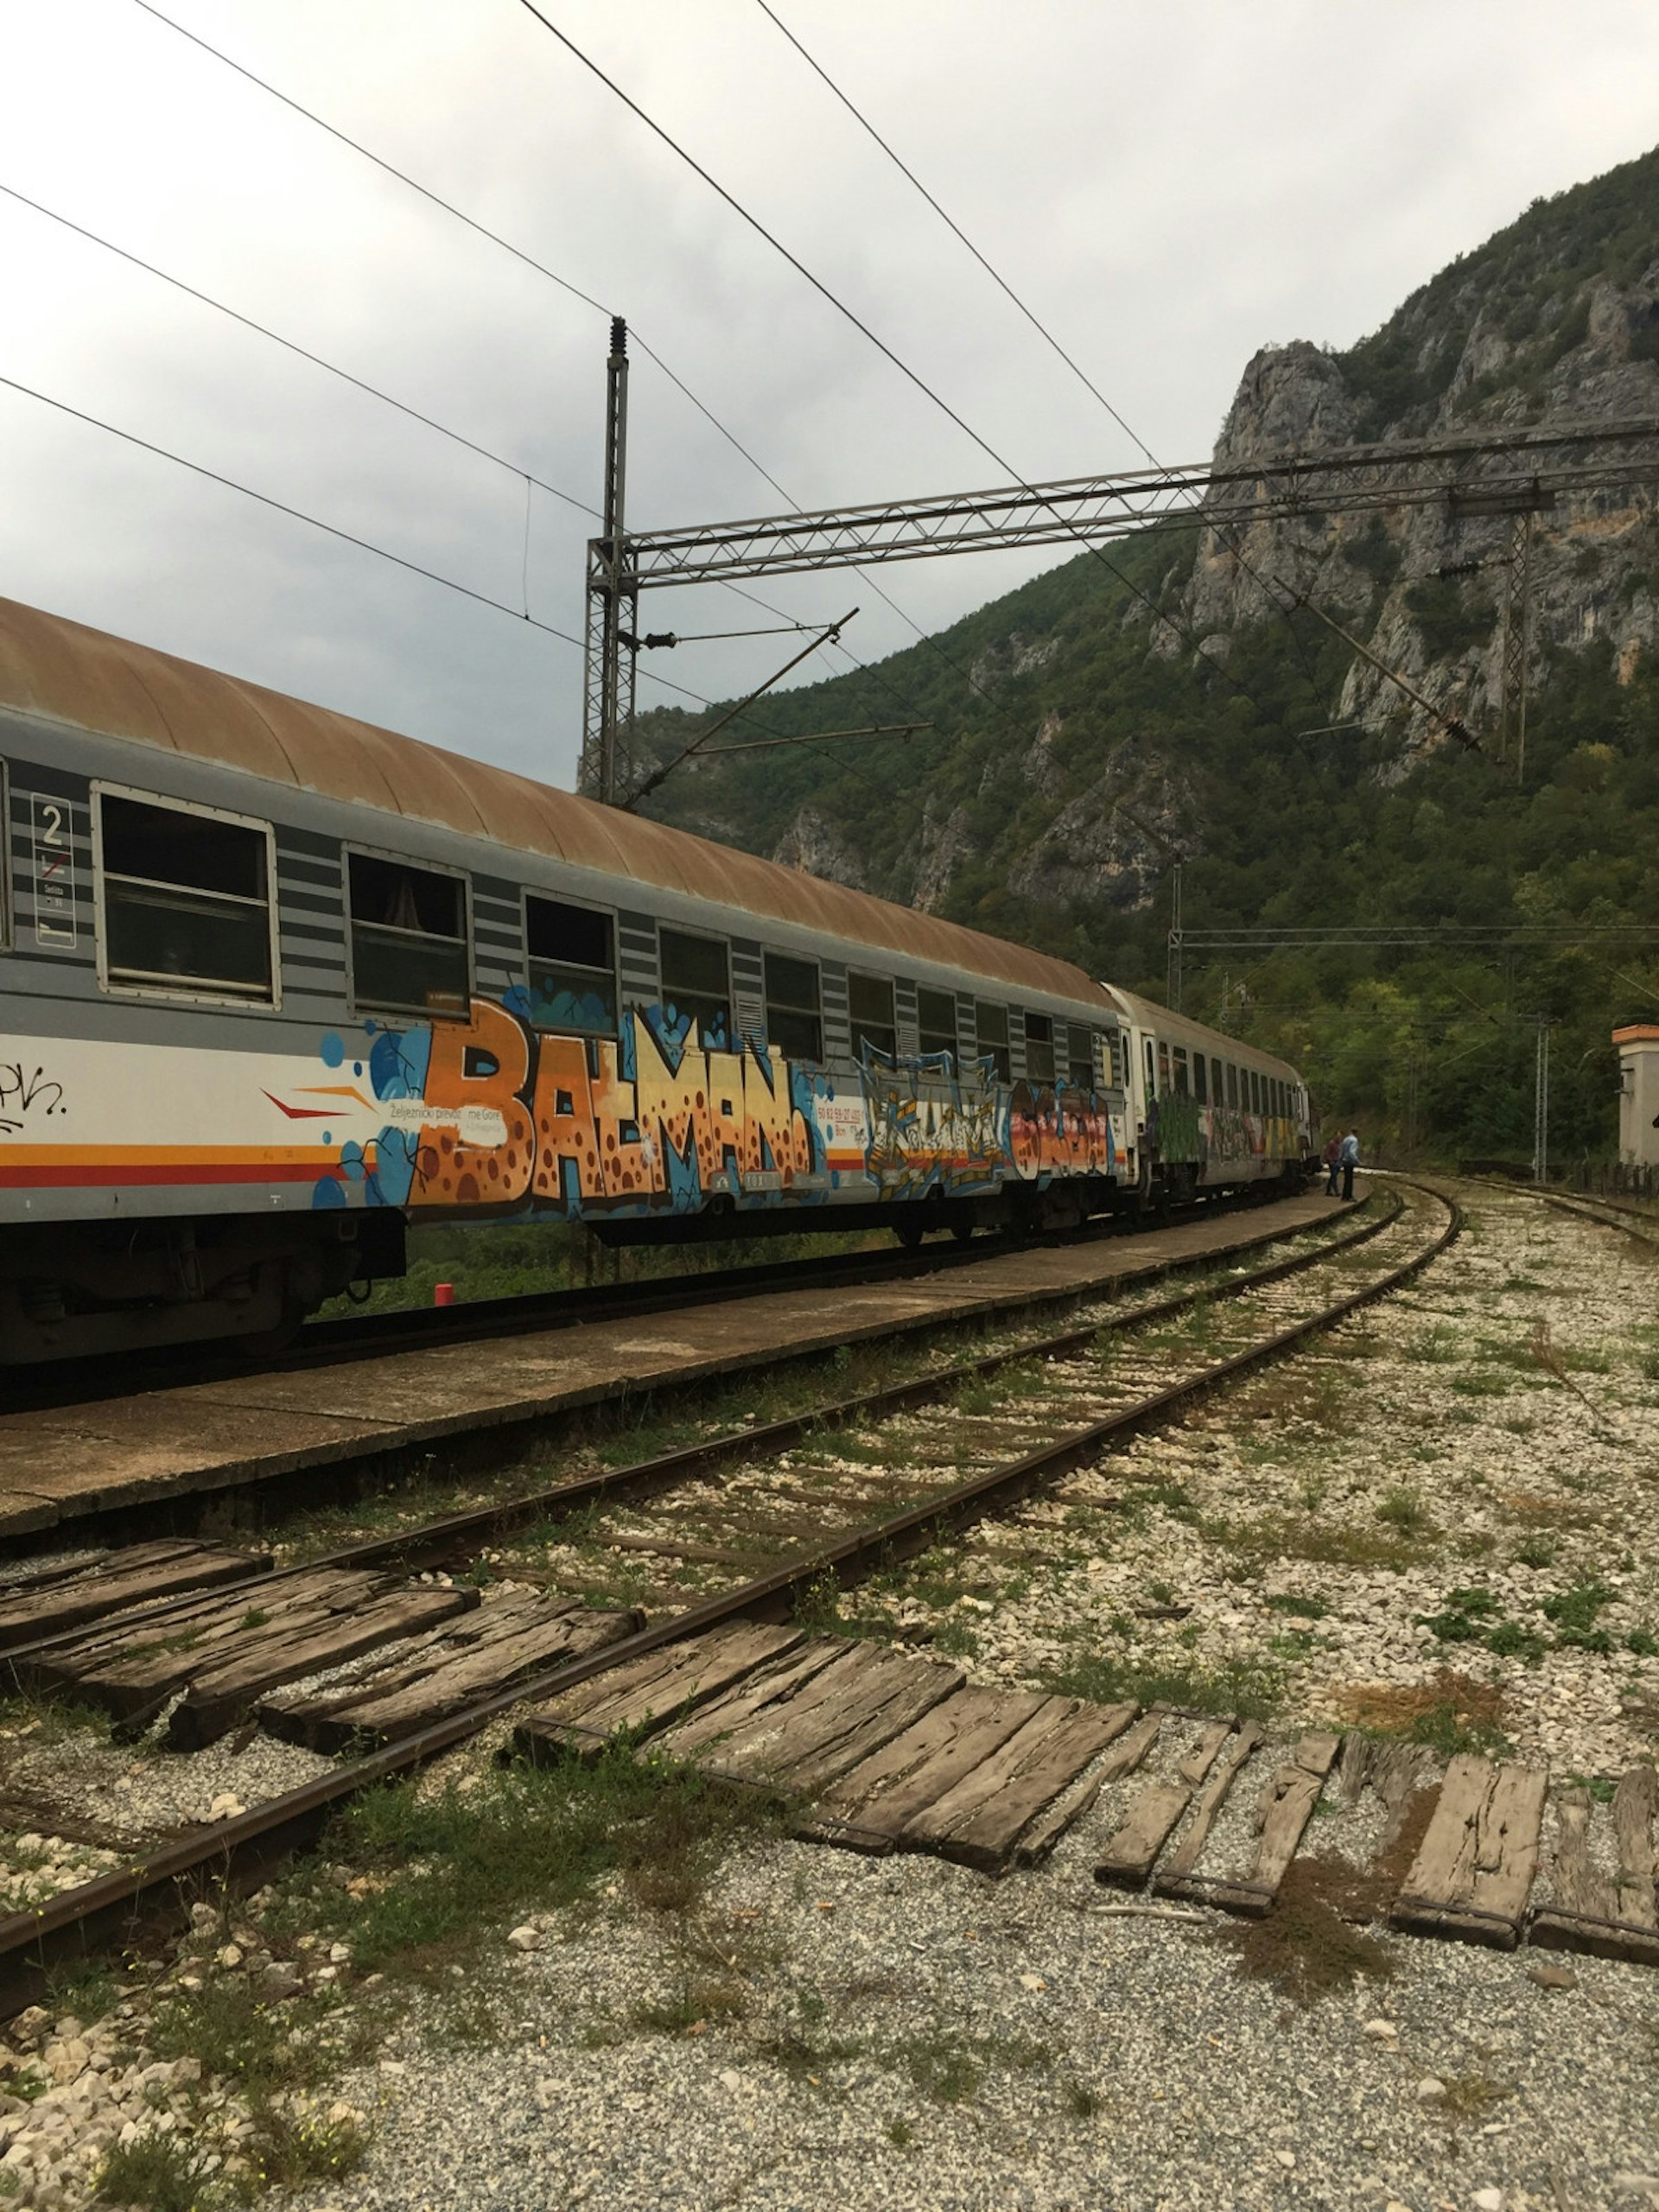 The graffiti-covered carriage at one of the many stops on the Belgrade-Bar railway line